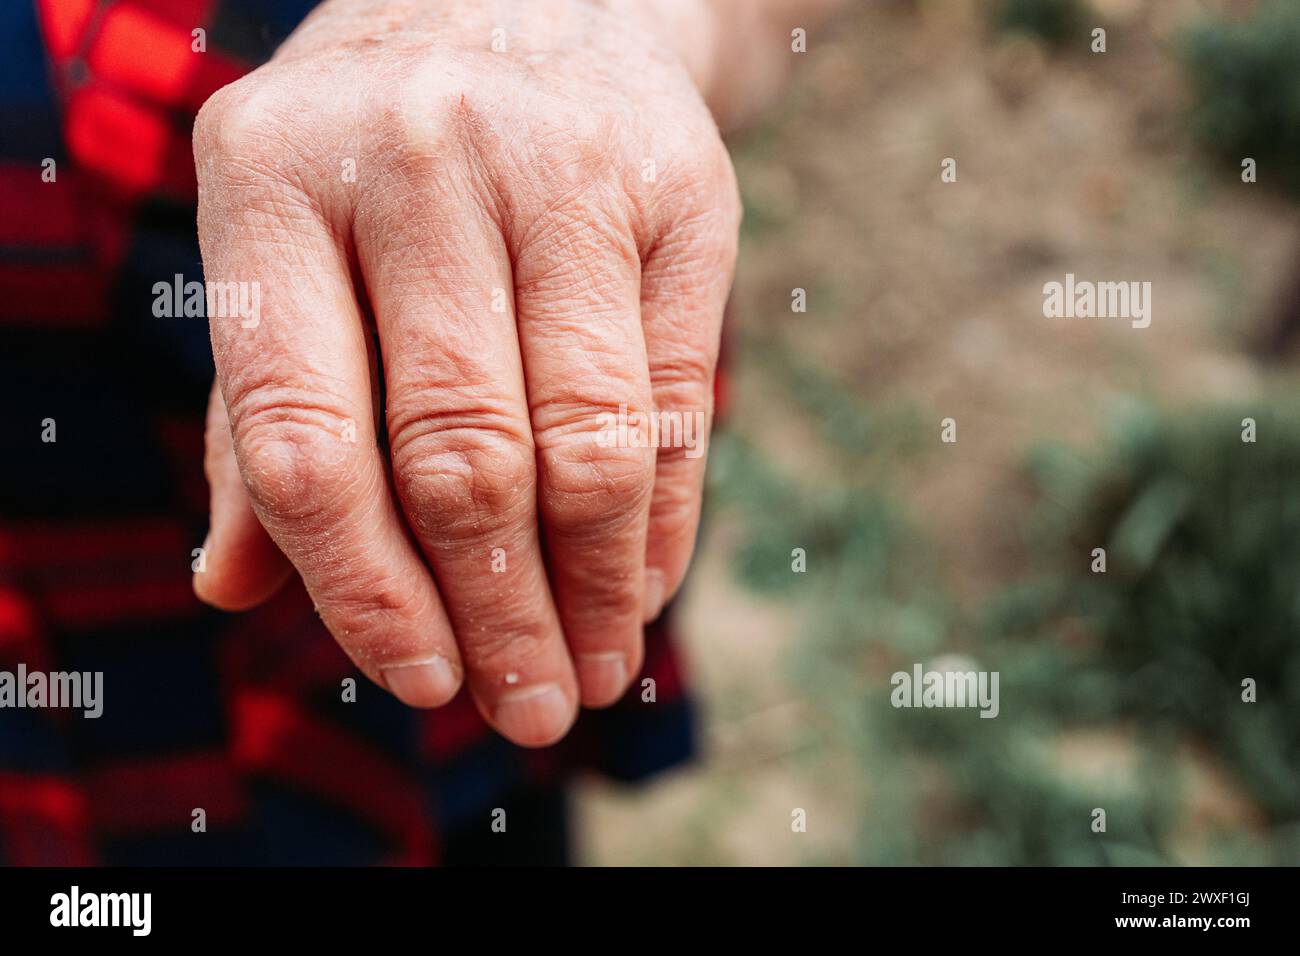 Elderly woman showing her hand. Older people Stock Photo